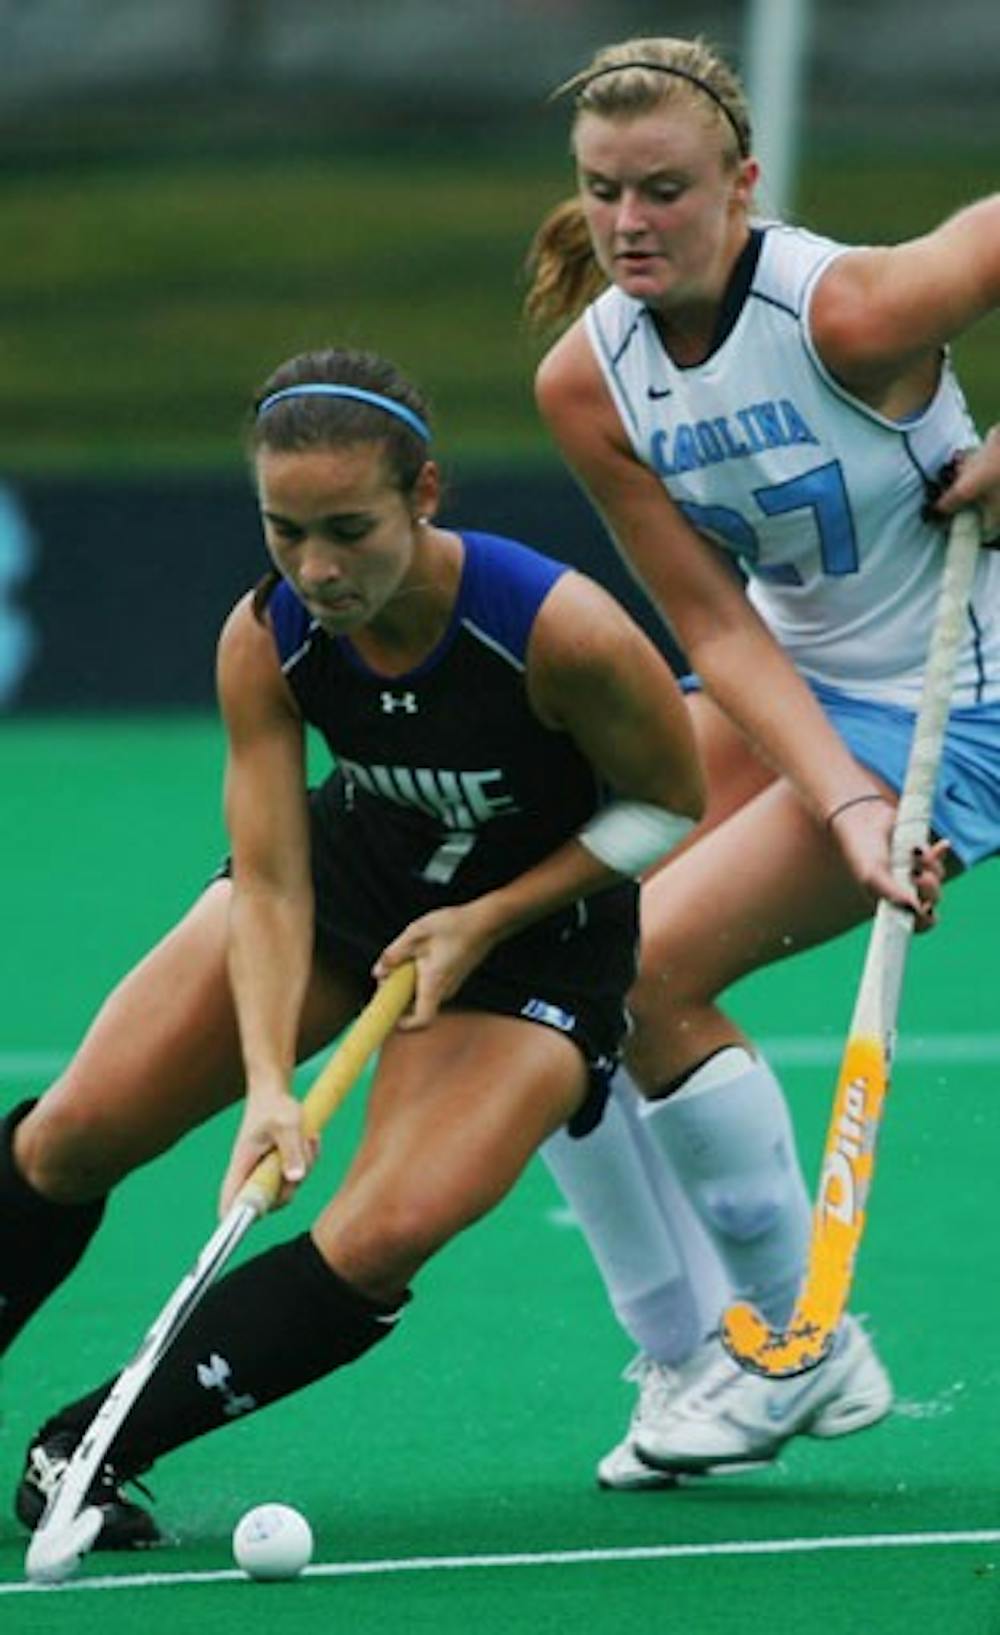 North Carolina scored quickly out of the gates, tallying a point in just more than one minute. DTH/Katherine Vance